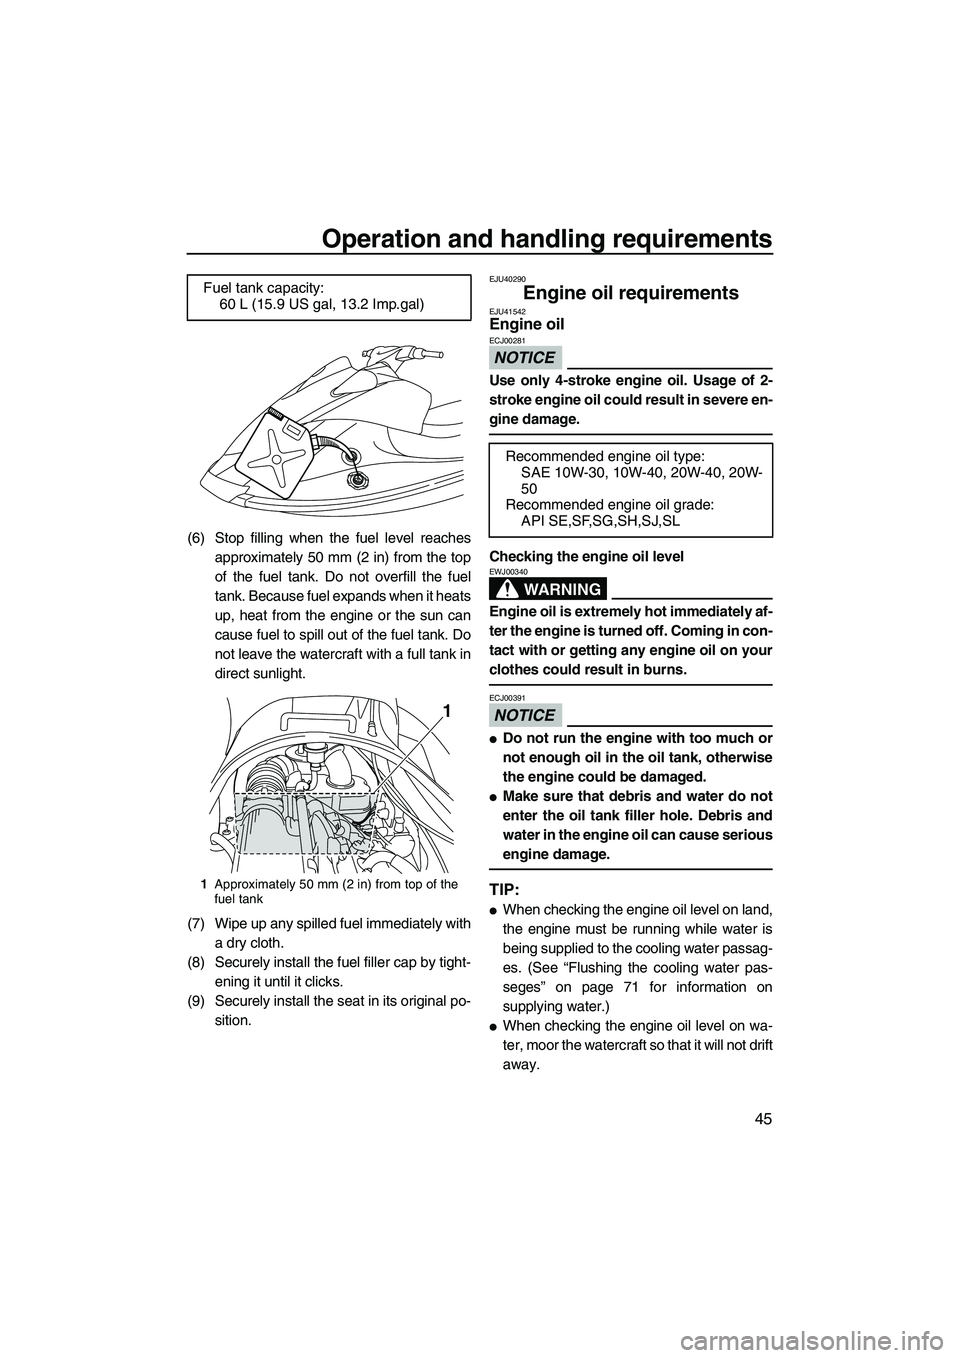 YAMAHA VX SPORT 2013  Owners Manual Operation and handling requirements
45
(6) Stop filling when the fuel level reachesapproximately 50 mm (2 in) from the top
of the fuel tank. Do not overfill the fuel
tank. Because fuel expands when it